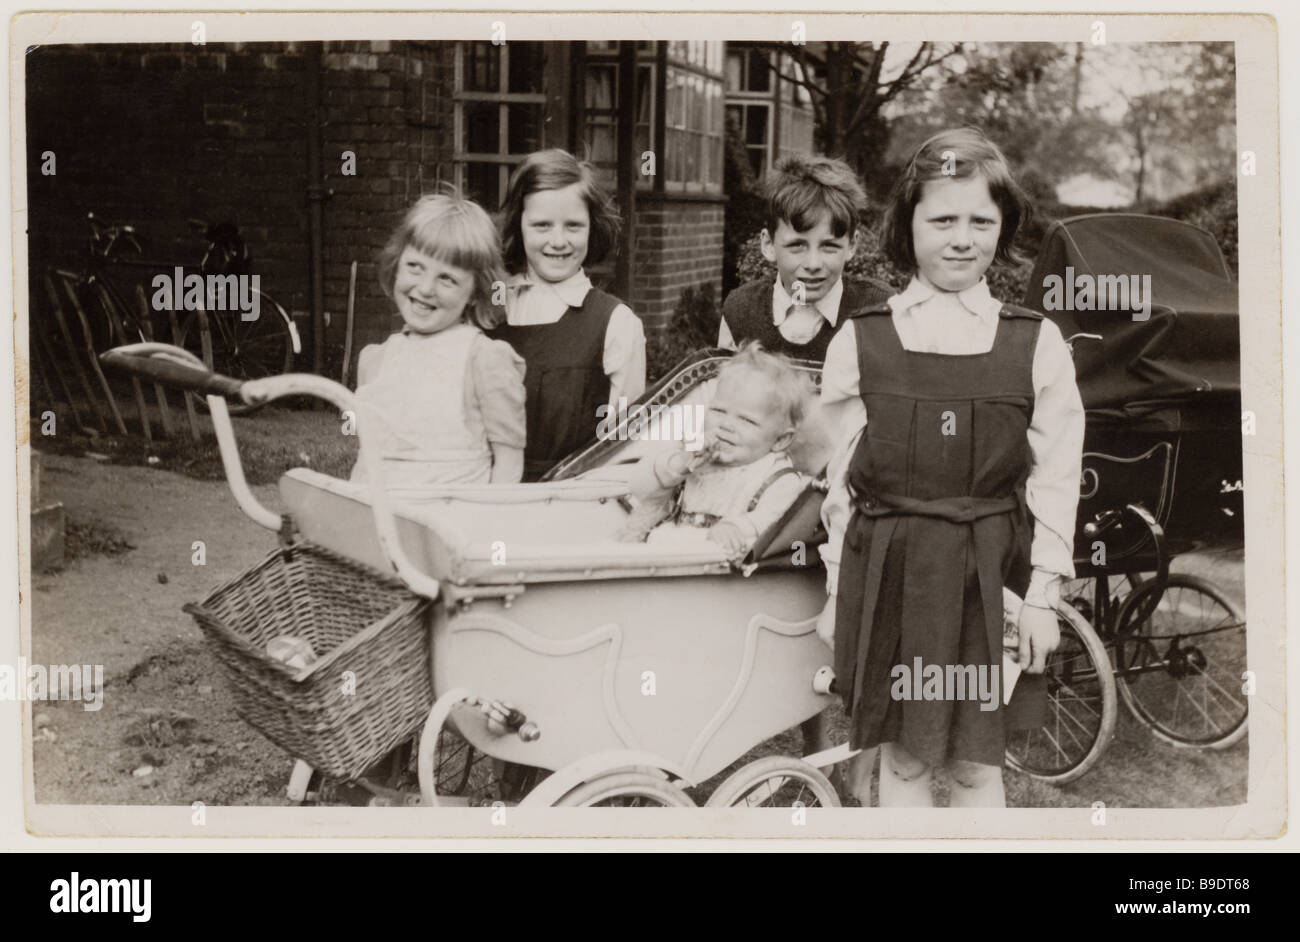 Cheeky young school children with prams looking after a baby outside their home in the 1950's, U.K. Stock Photo